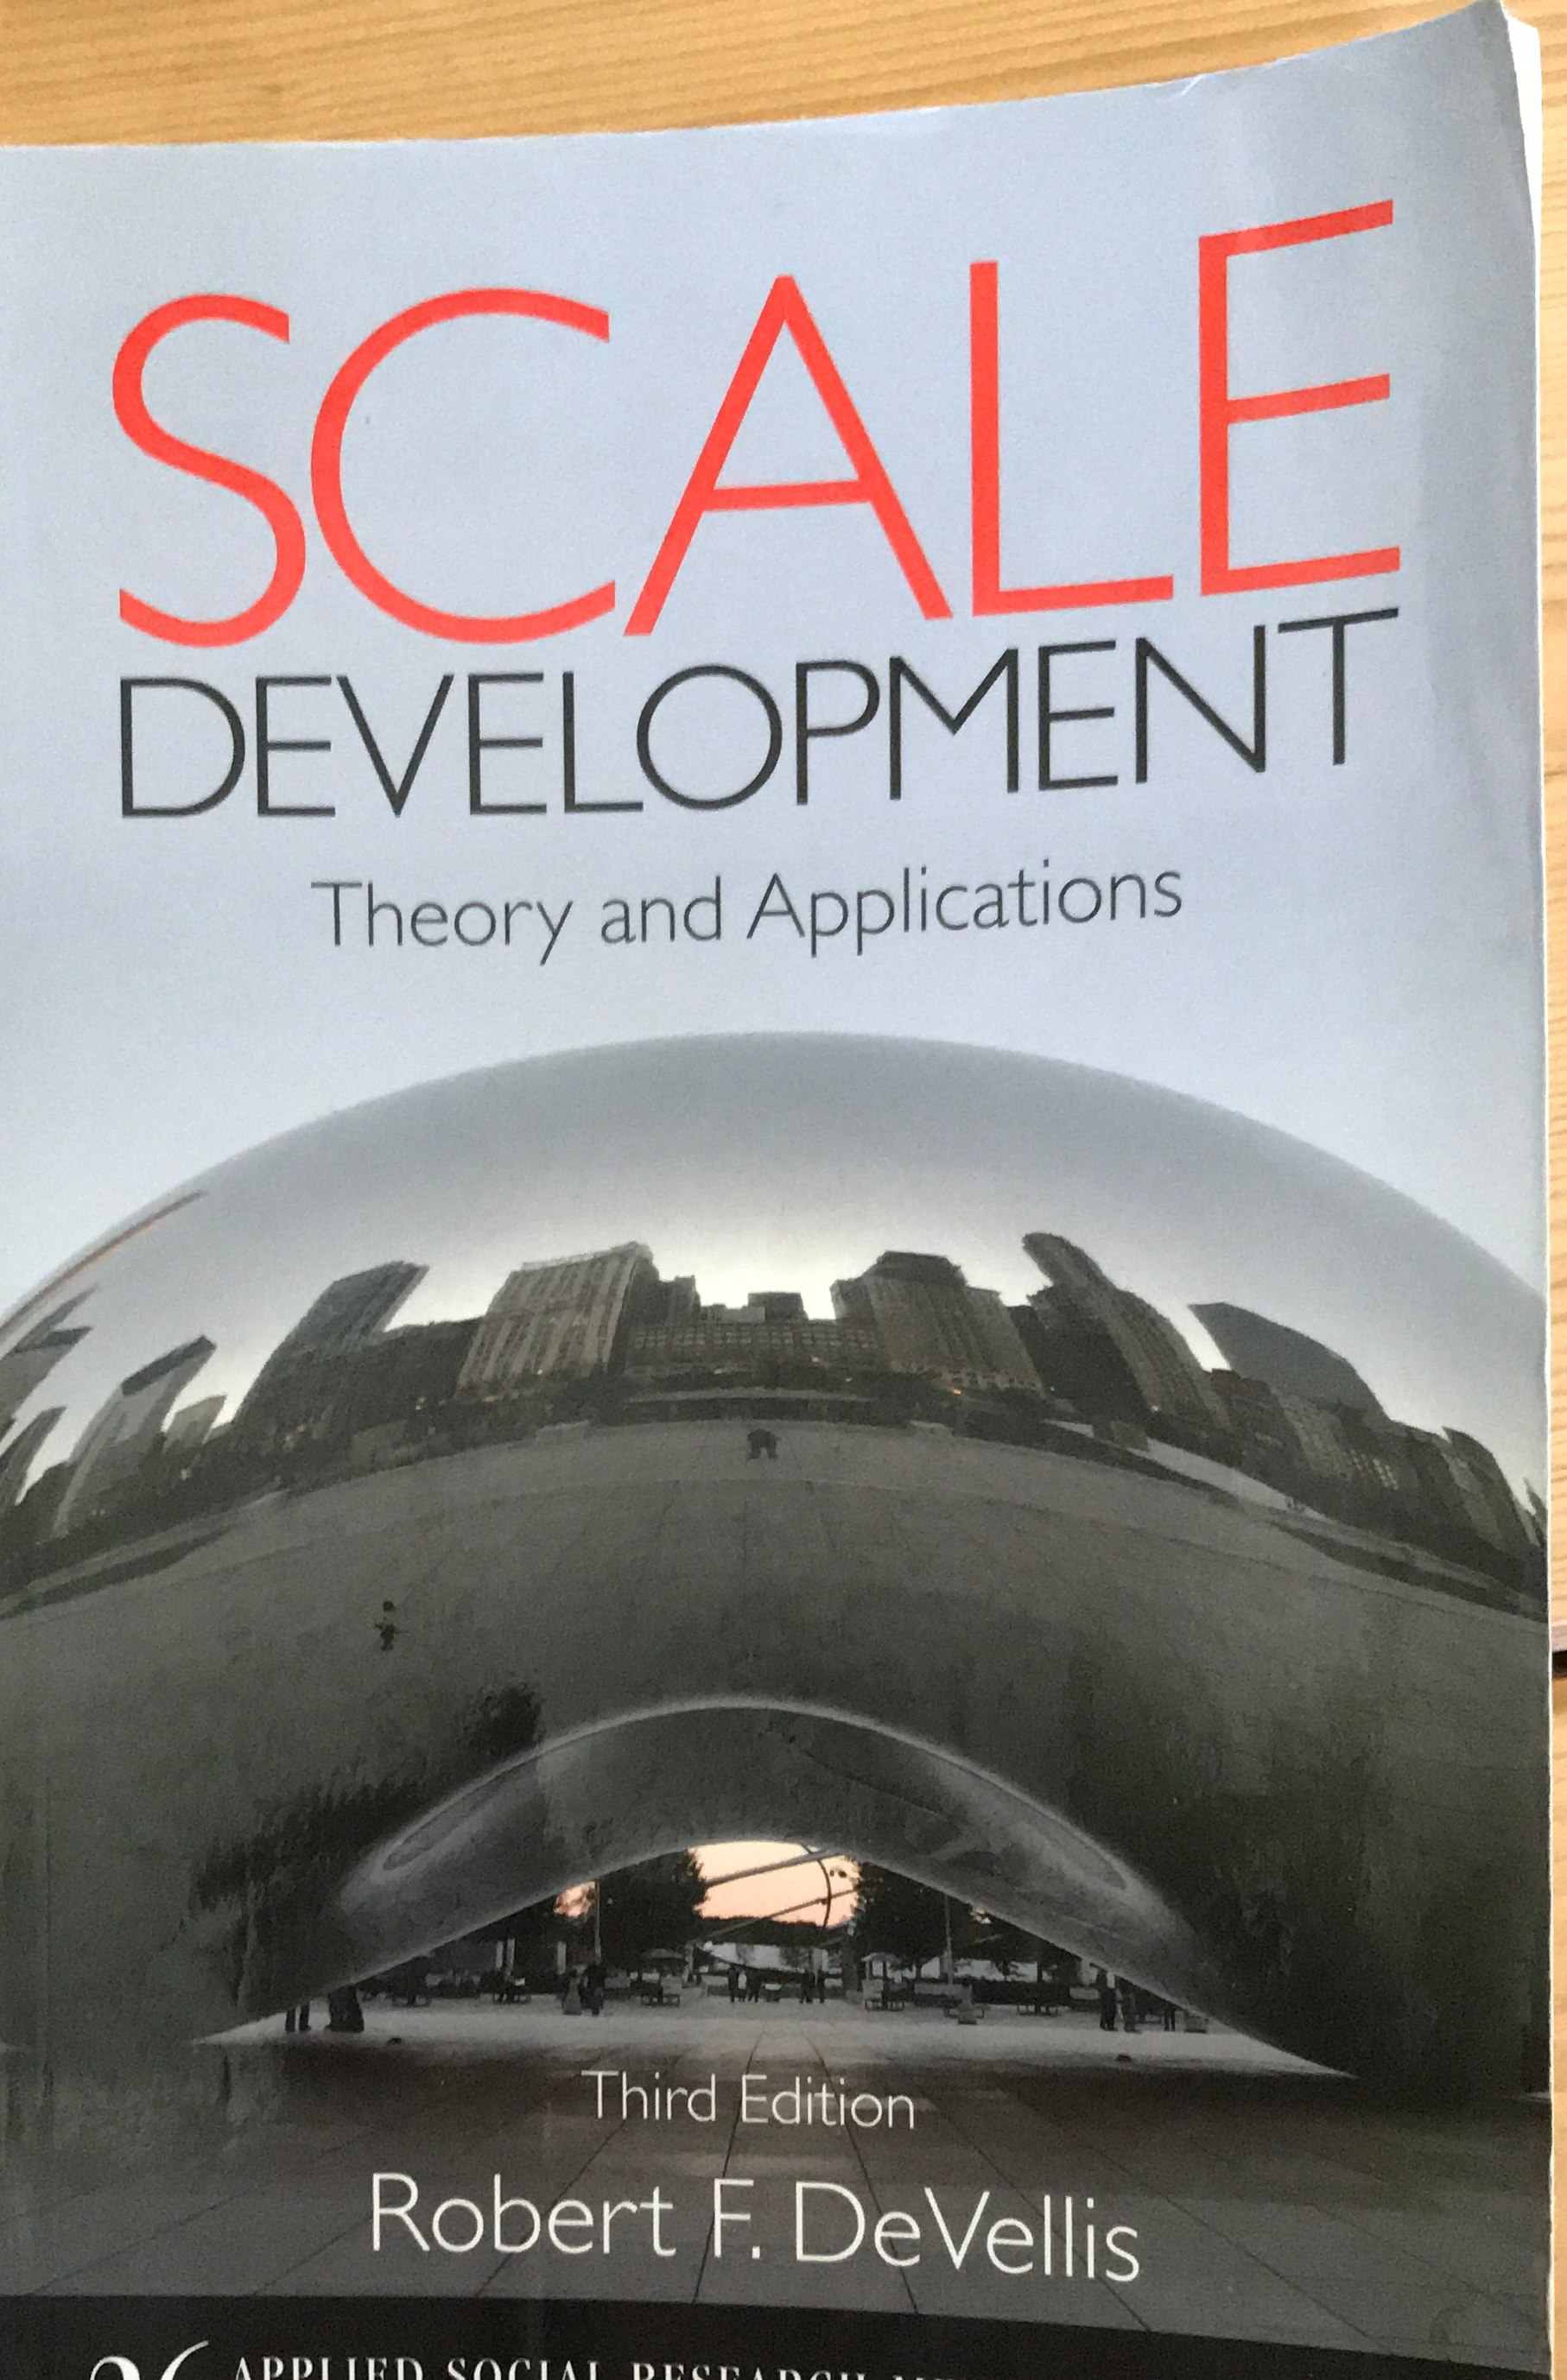 Scale Development - Theory and Applications